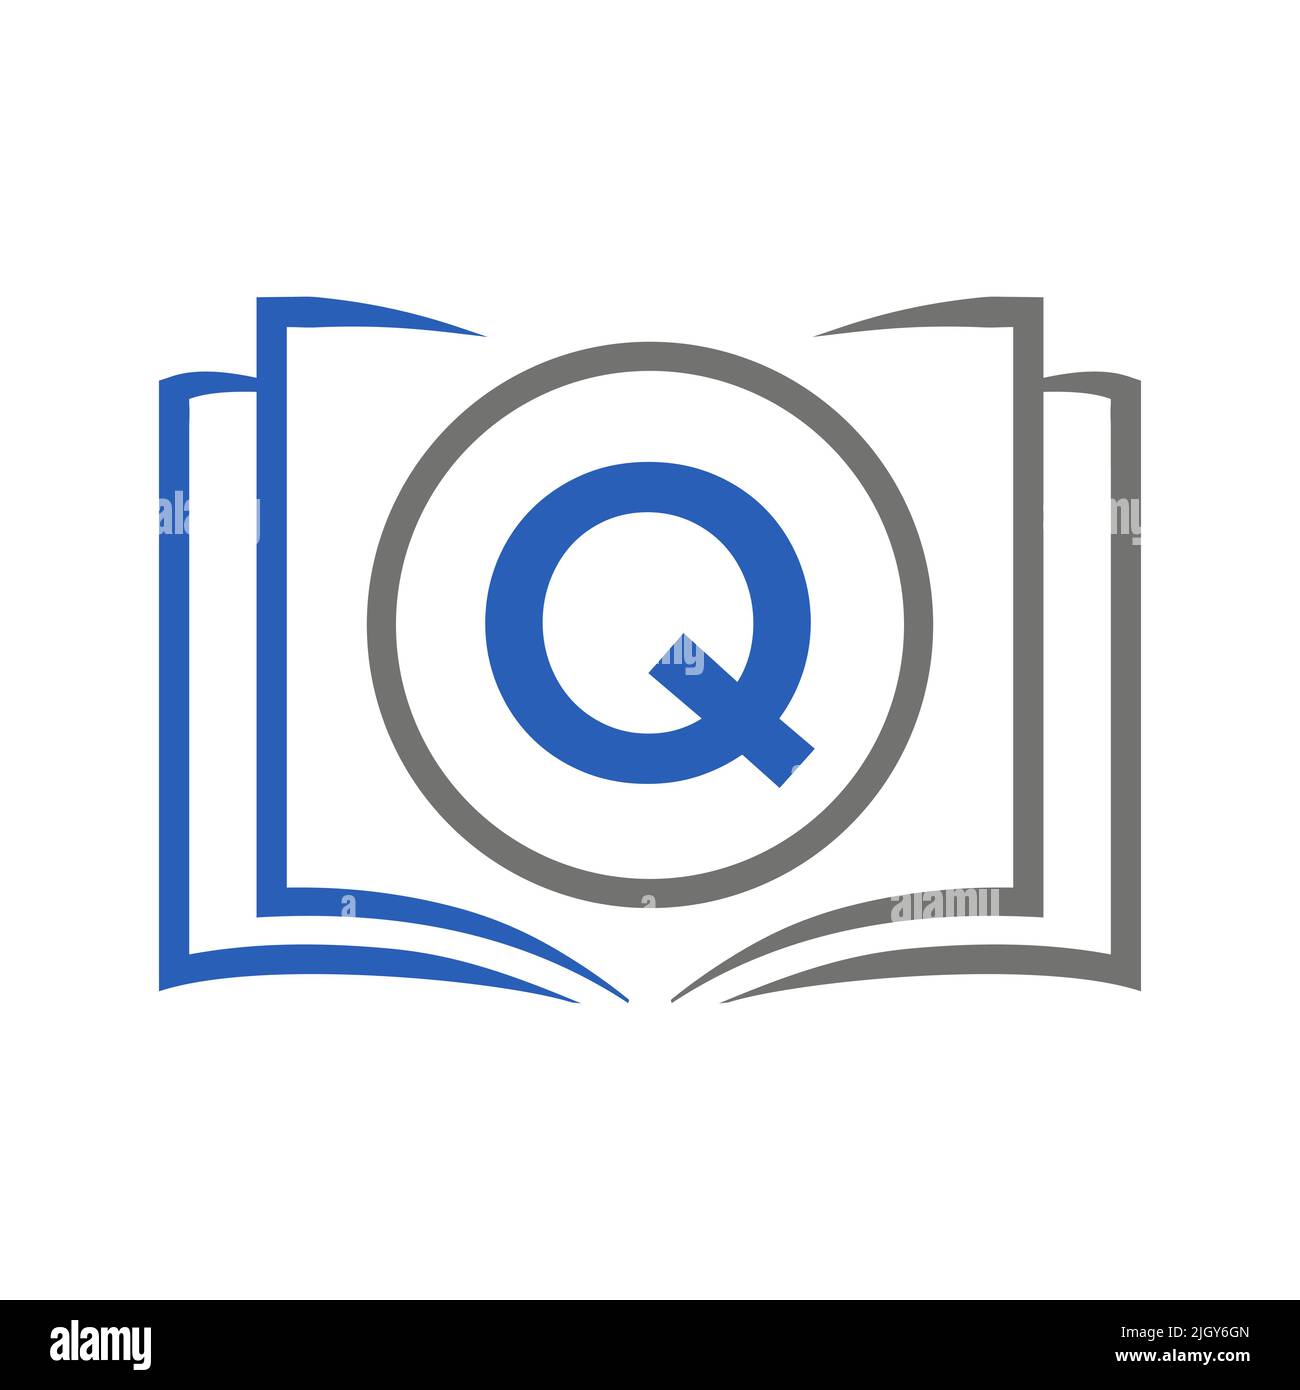 Education Logo On Letter Q Template. Open Book Logo On Q Letter, Initial Educational Sign Concept Template Stock Vector